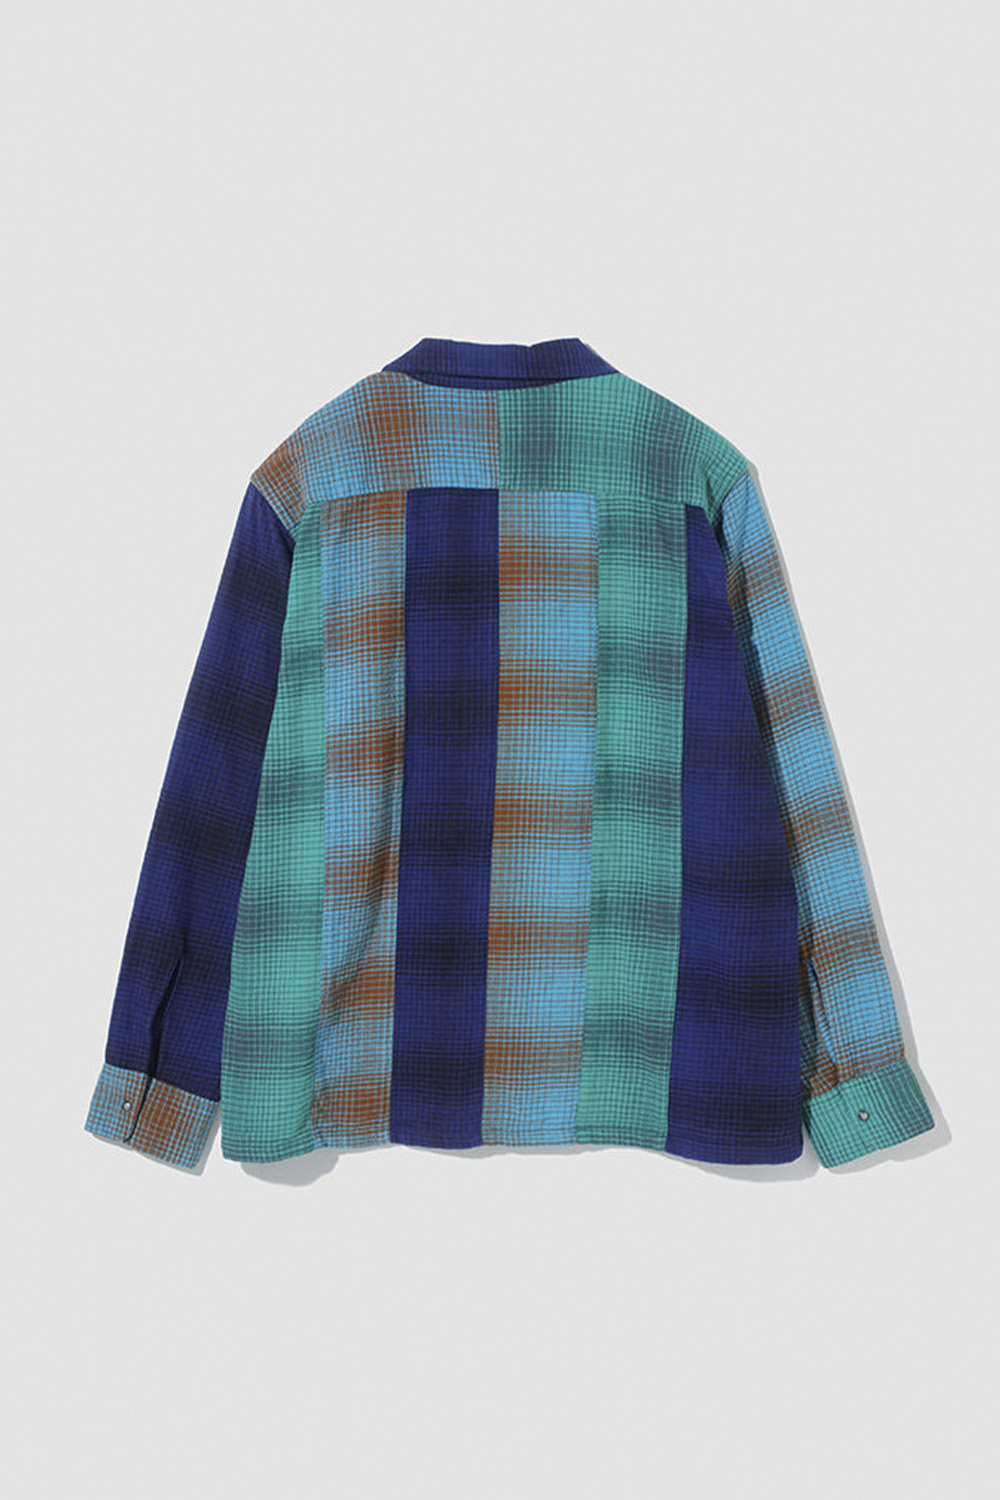 NOMA t.d. N Ombre Plaid Patchwork Shirt Navy/emerld/water